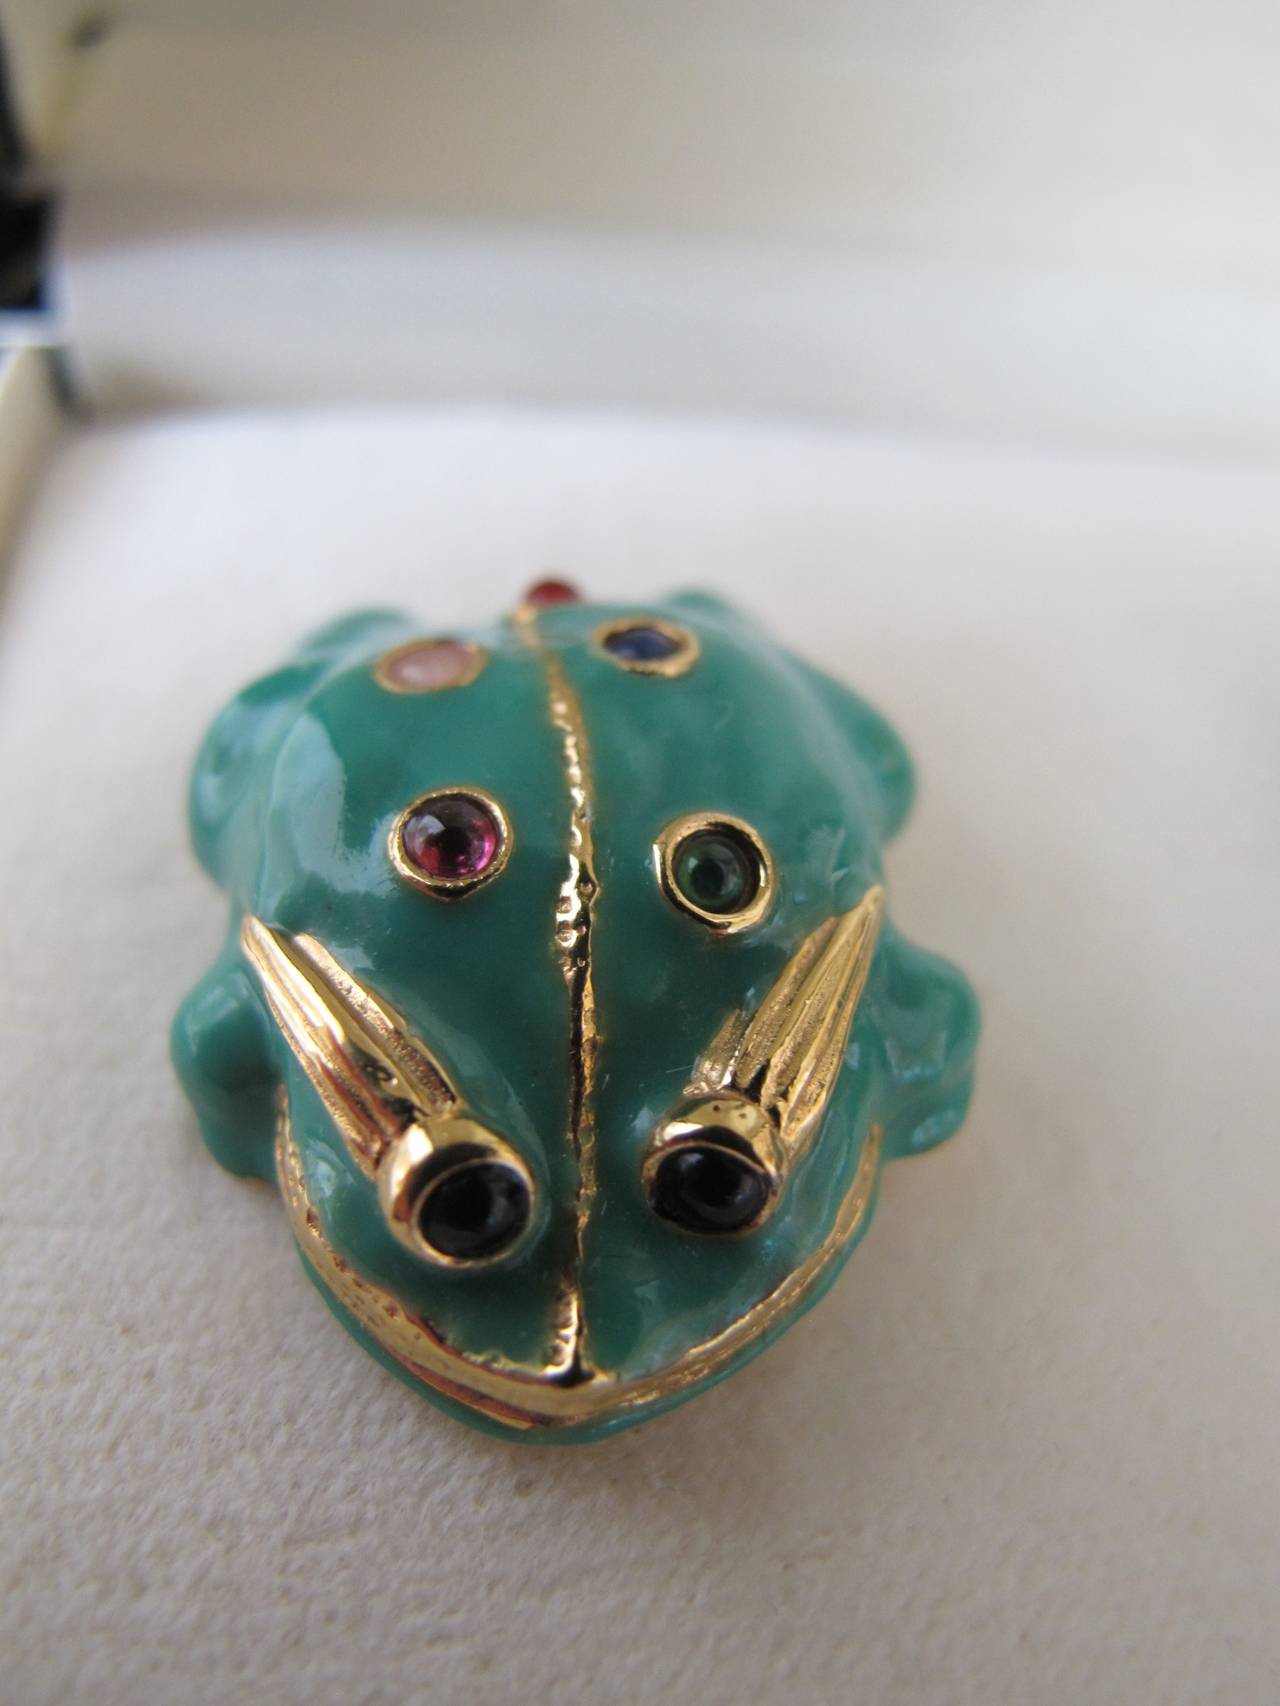 Women's Judith Lieber Frog Clip-On Earrings with Semi Precious Stones